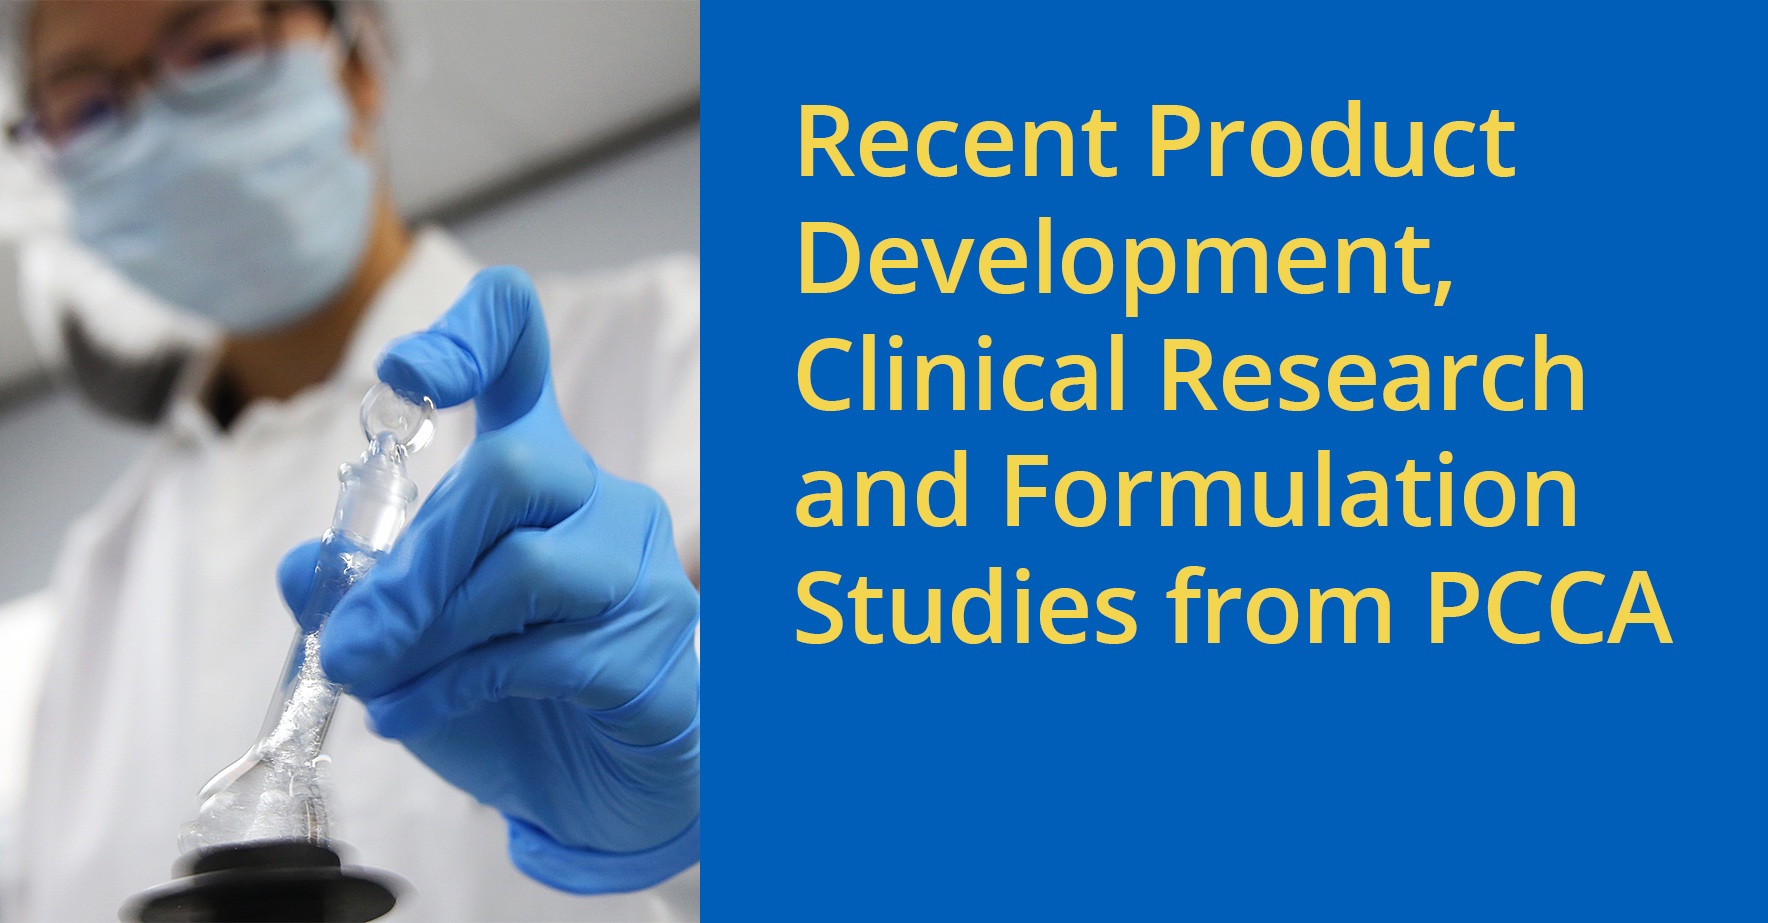 Recent_Product_Development_Clinical_Research_and_Formulation_Studies_from_PCCA.jpg